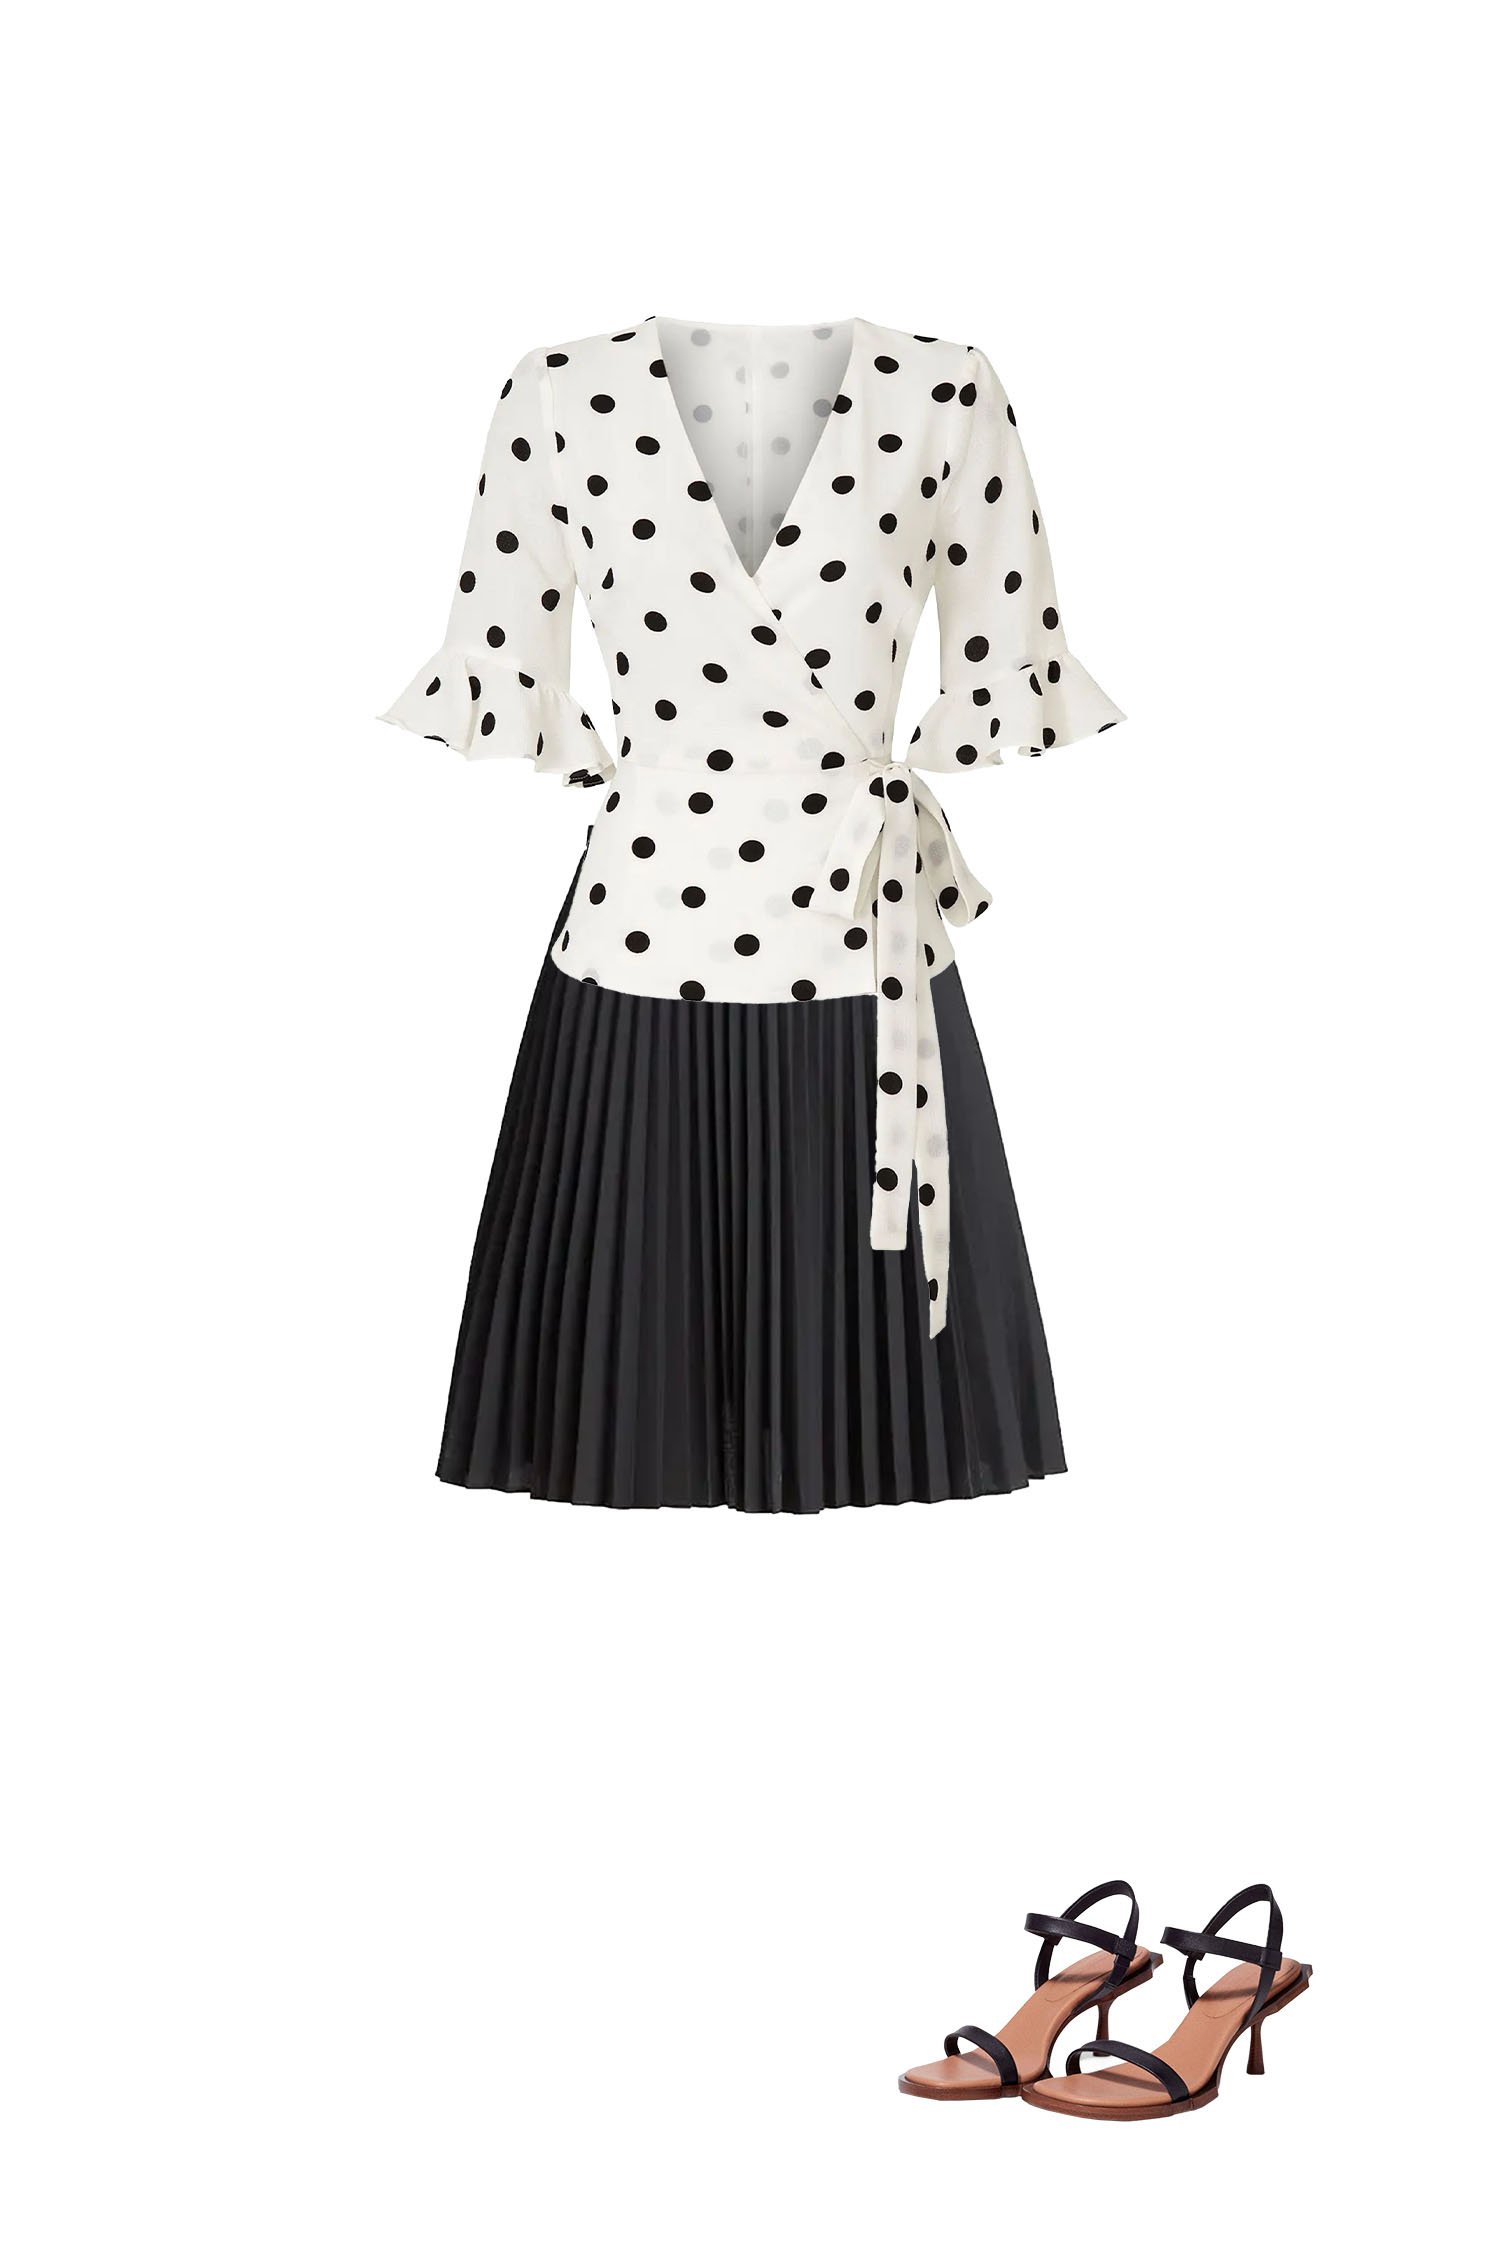 Black Pleated Short Skirt Outfit with White Polka Dot Wrap Top and Black Heeled Sandals